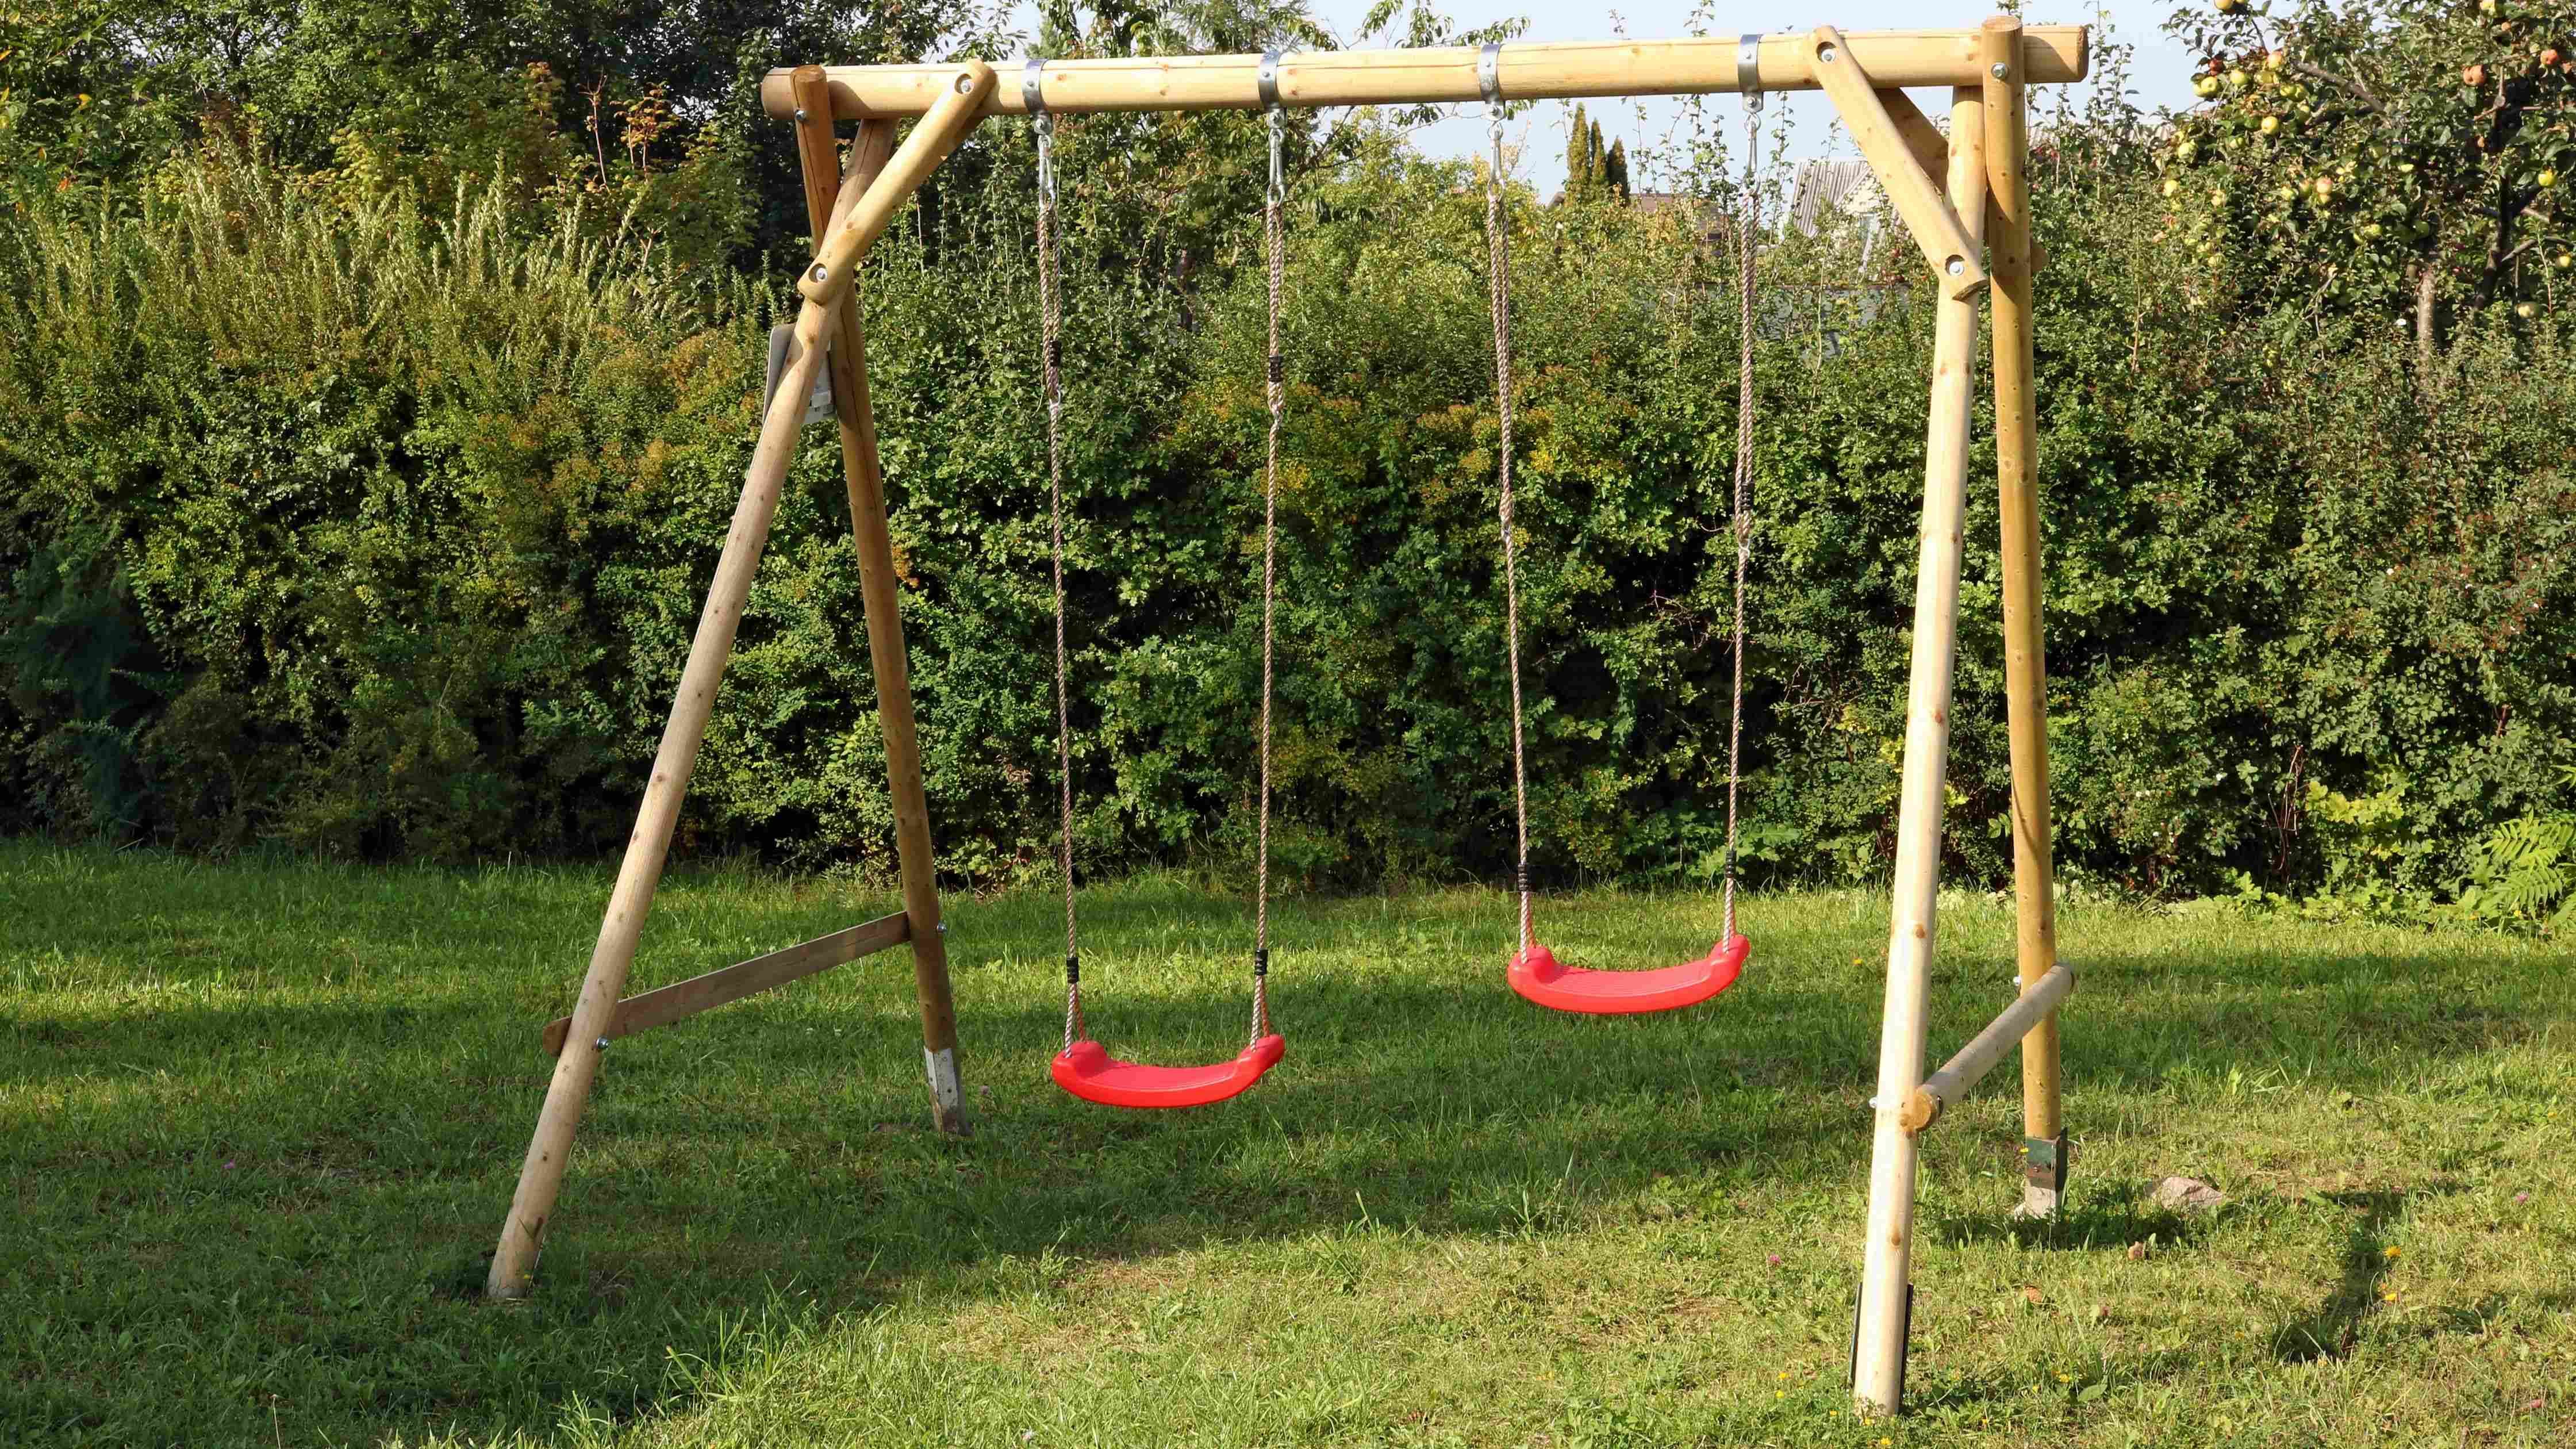 How to install a swing set